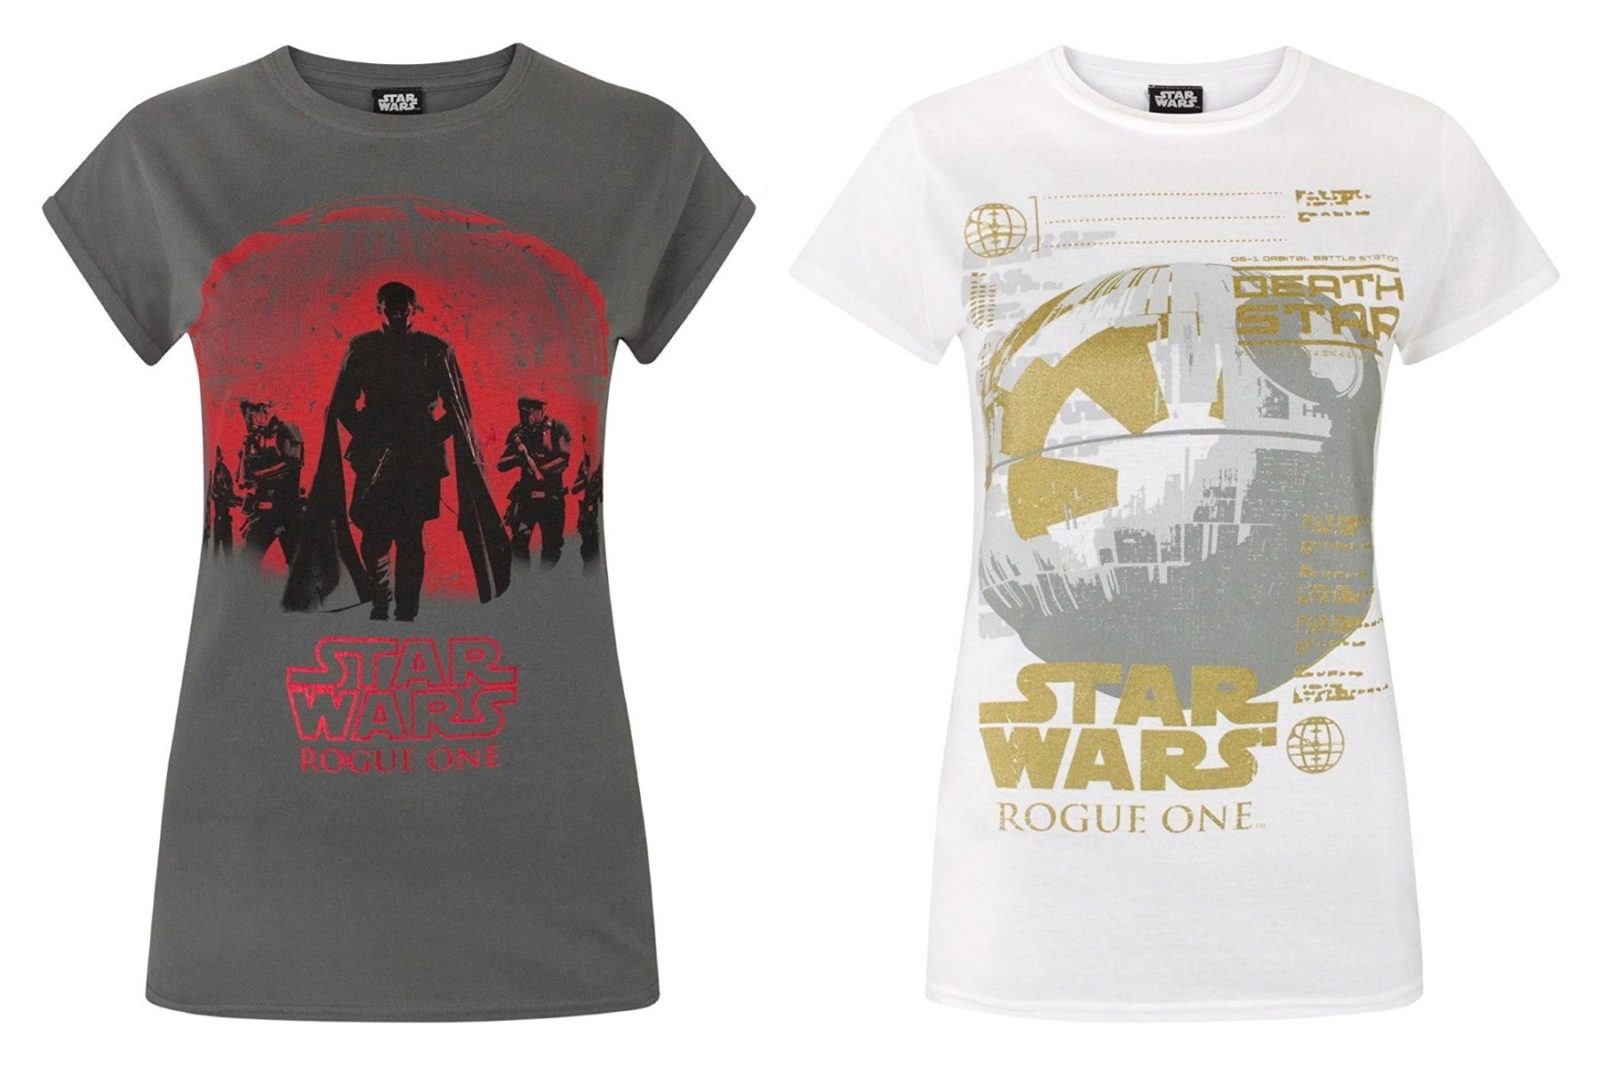 Women's Rogue One t-shirts available on Amazon